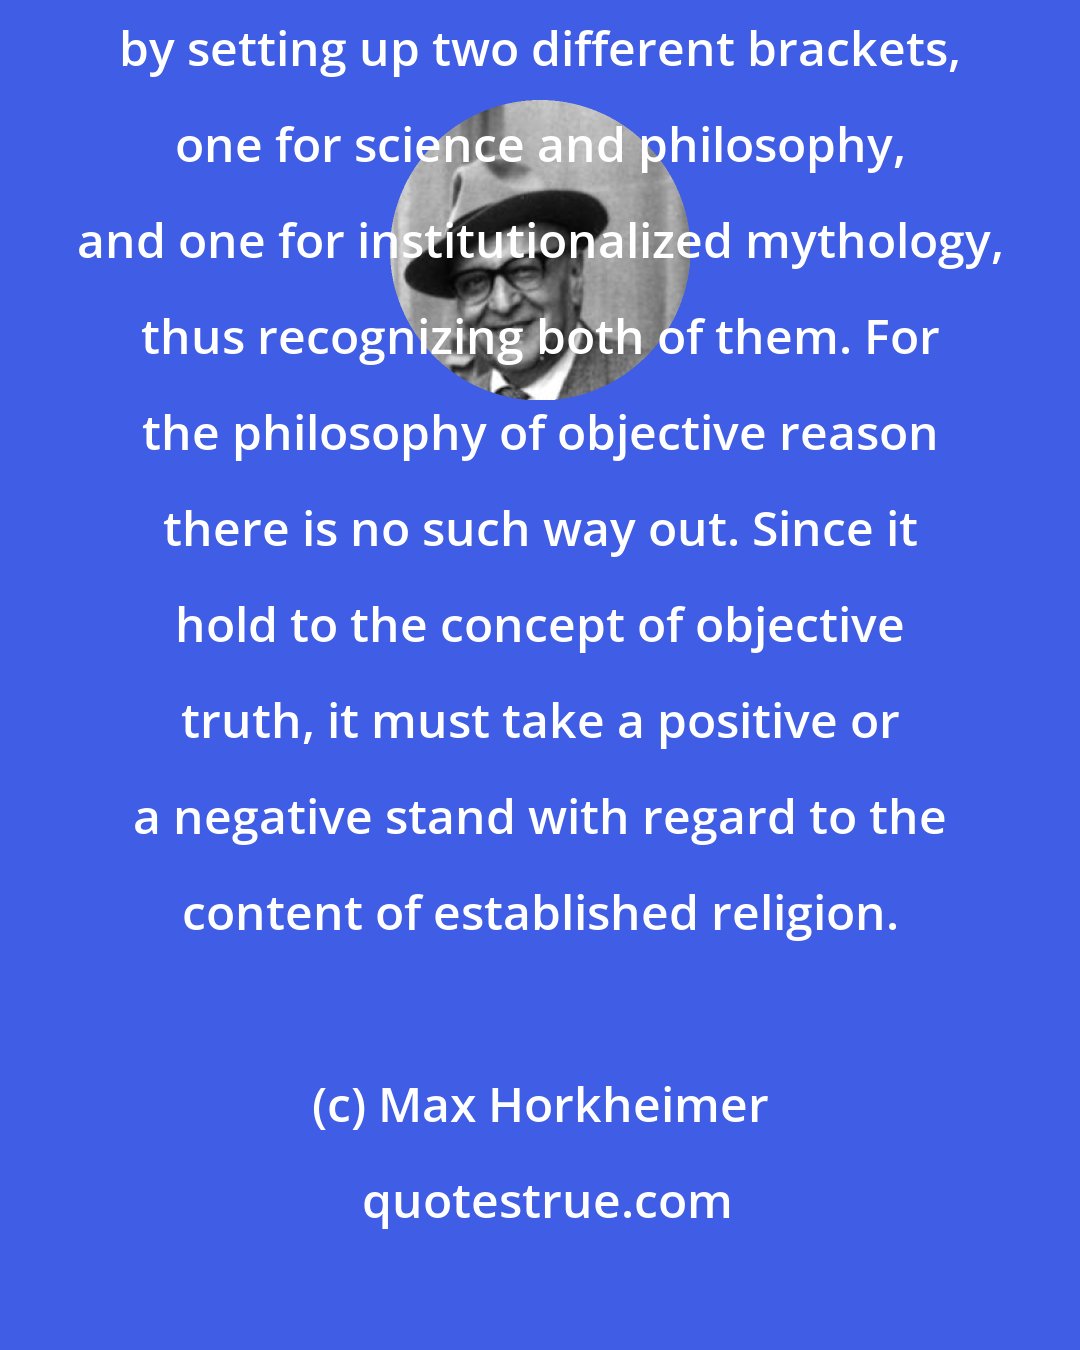 Max Horkheimer: Subjective reason ... is inclined to abandon the fight with religion by setting up two different brackets, one for science and philosophy, and one for institutionalized mythology, thus recognizing both of them. For the philosophy of objective reason there is no such way out. Since it hold to the concept of objective truth, it must take a positive or a negative stand with regard to the content of established religion.